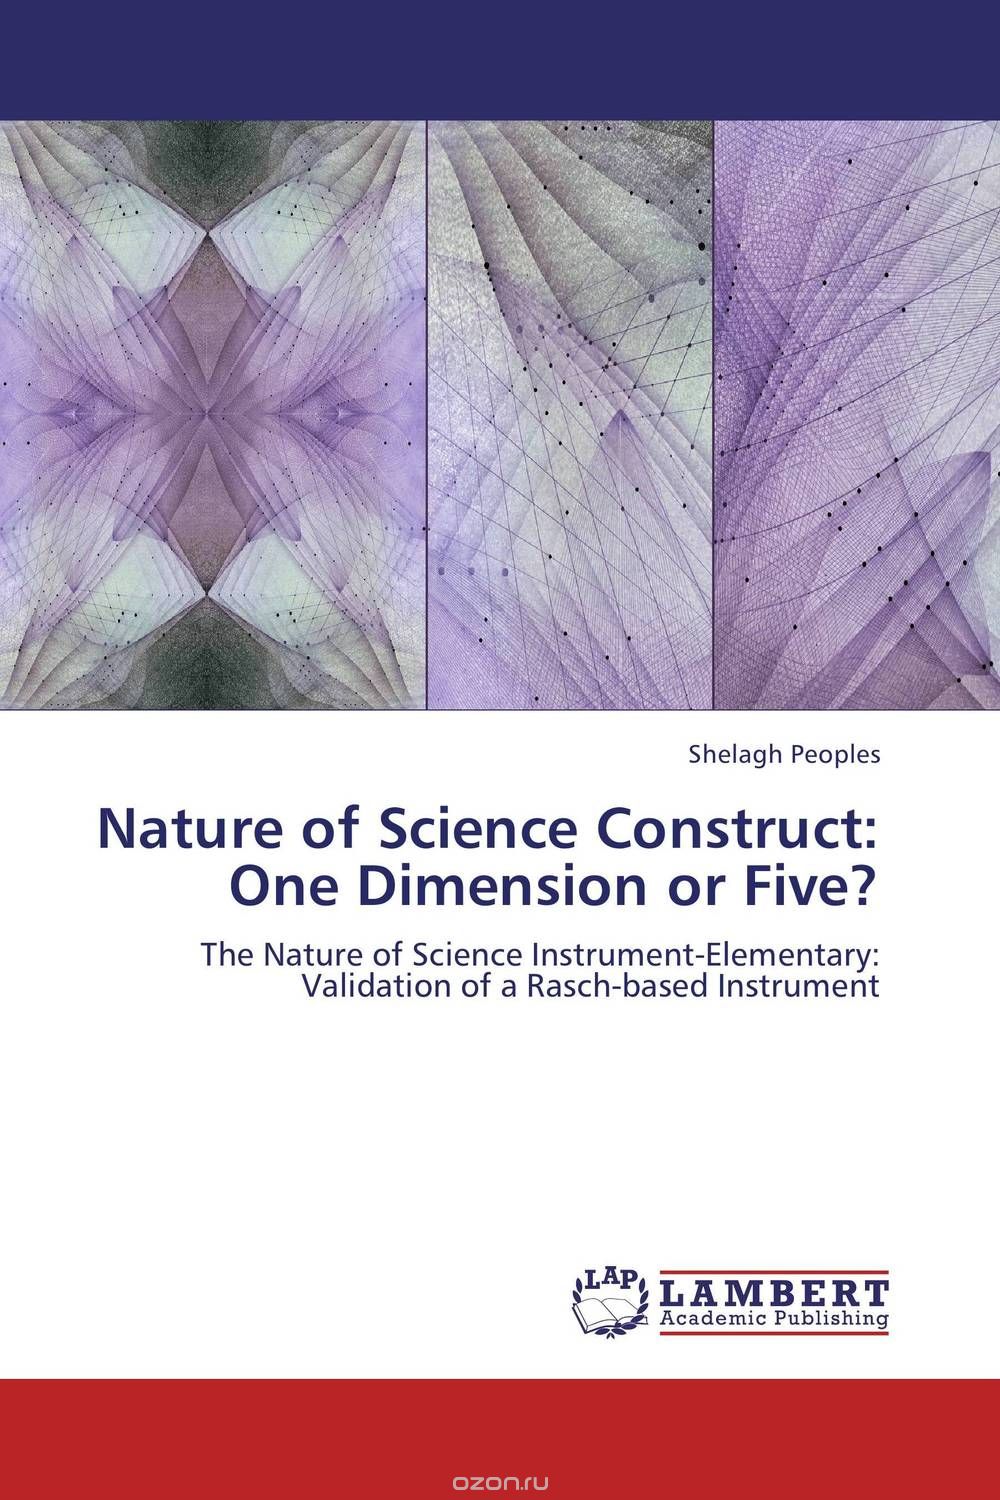 Nature of Science Construct: One Dimension or Five?